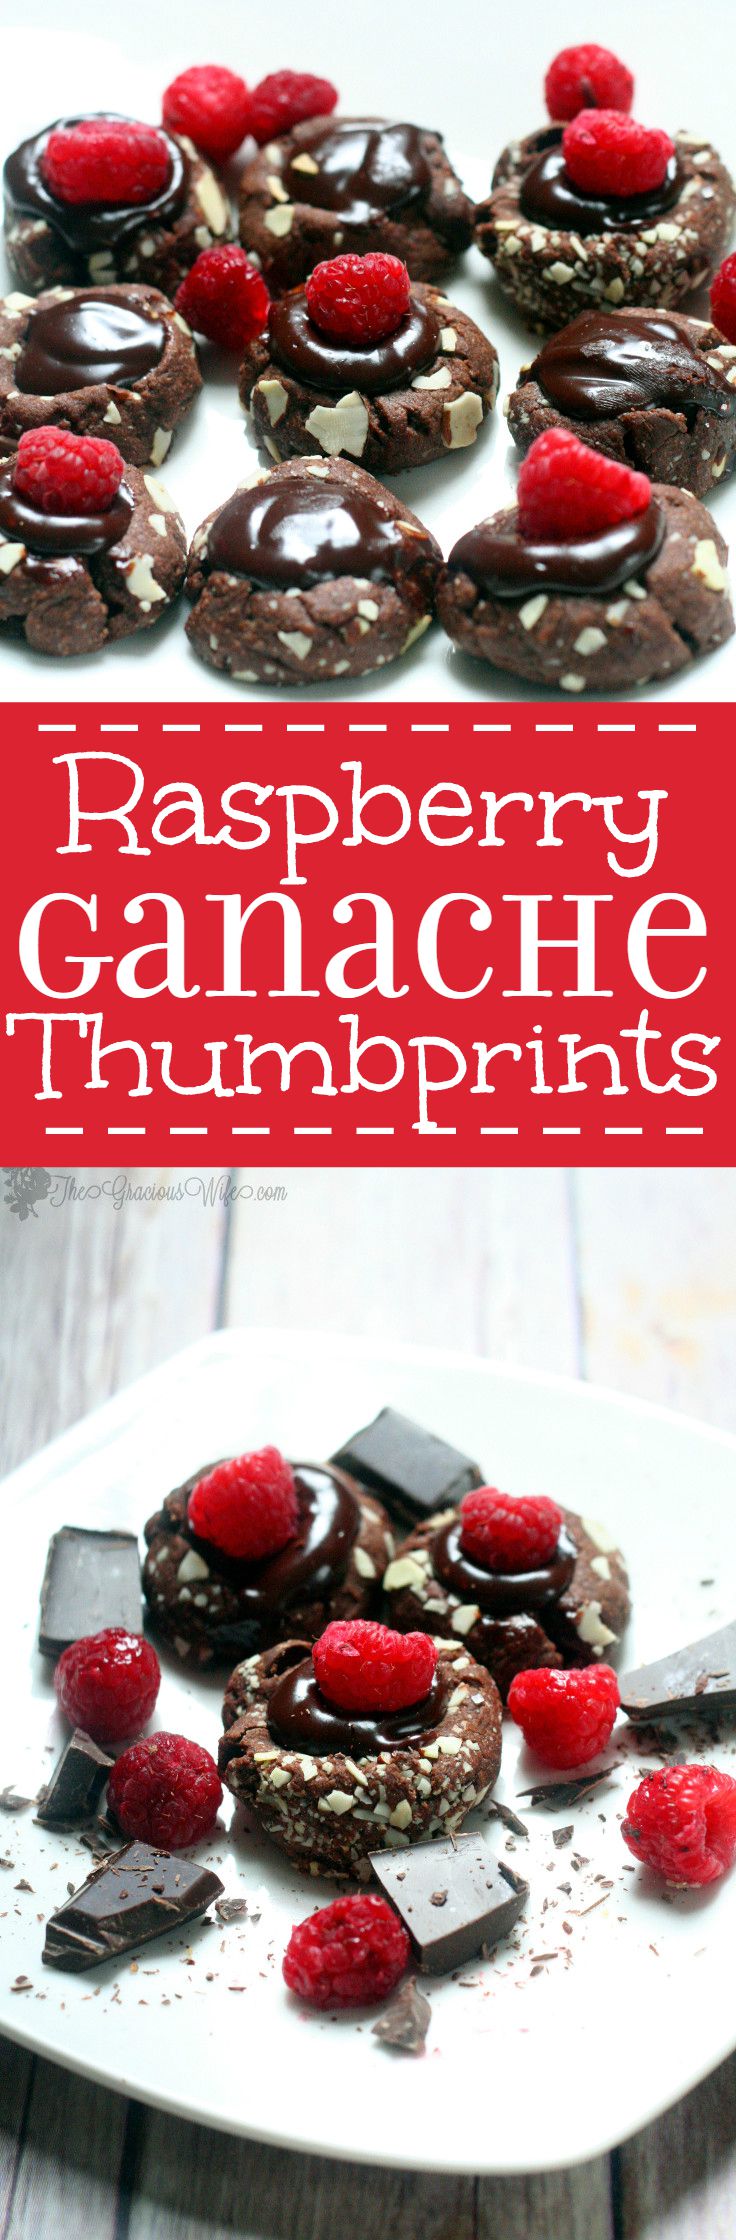 Raspberry Ganache Thumbprints Cookie Recipe - a pretty but easy dessert cookie recipe.  Chocolate thumbprints filled with a rich super easy chocolate raspberry ganache and topped with a fresh raspberry.  Makes a pretty Christmas cookie too!